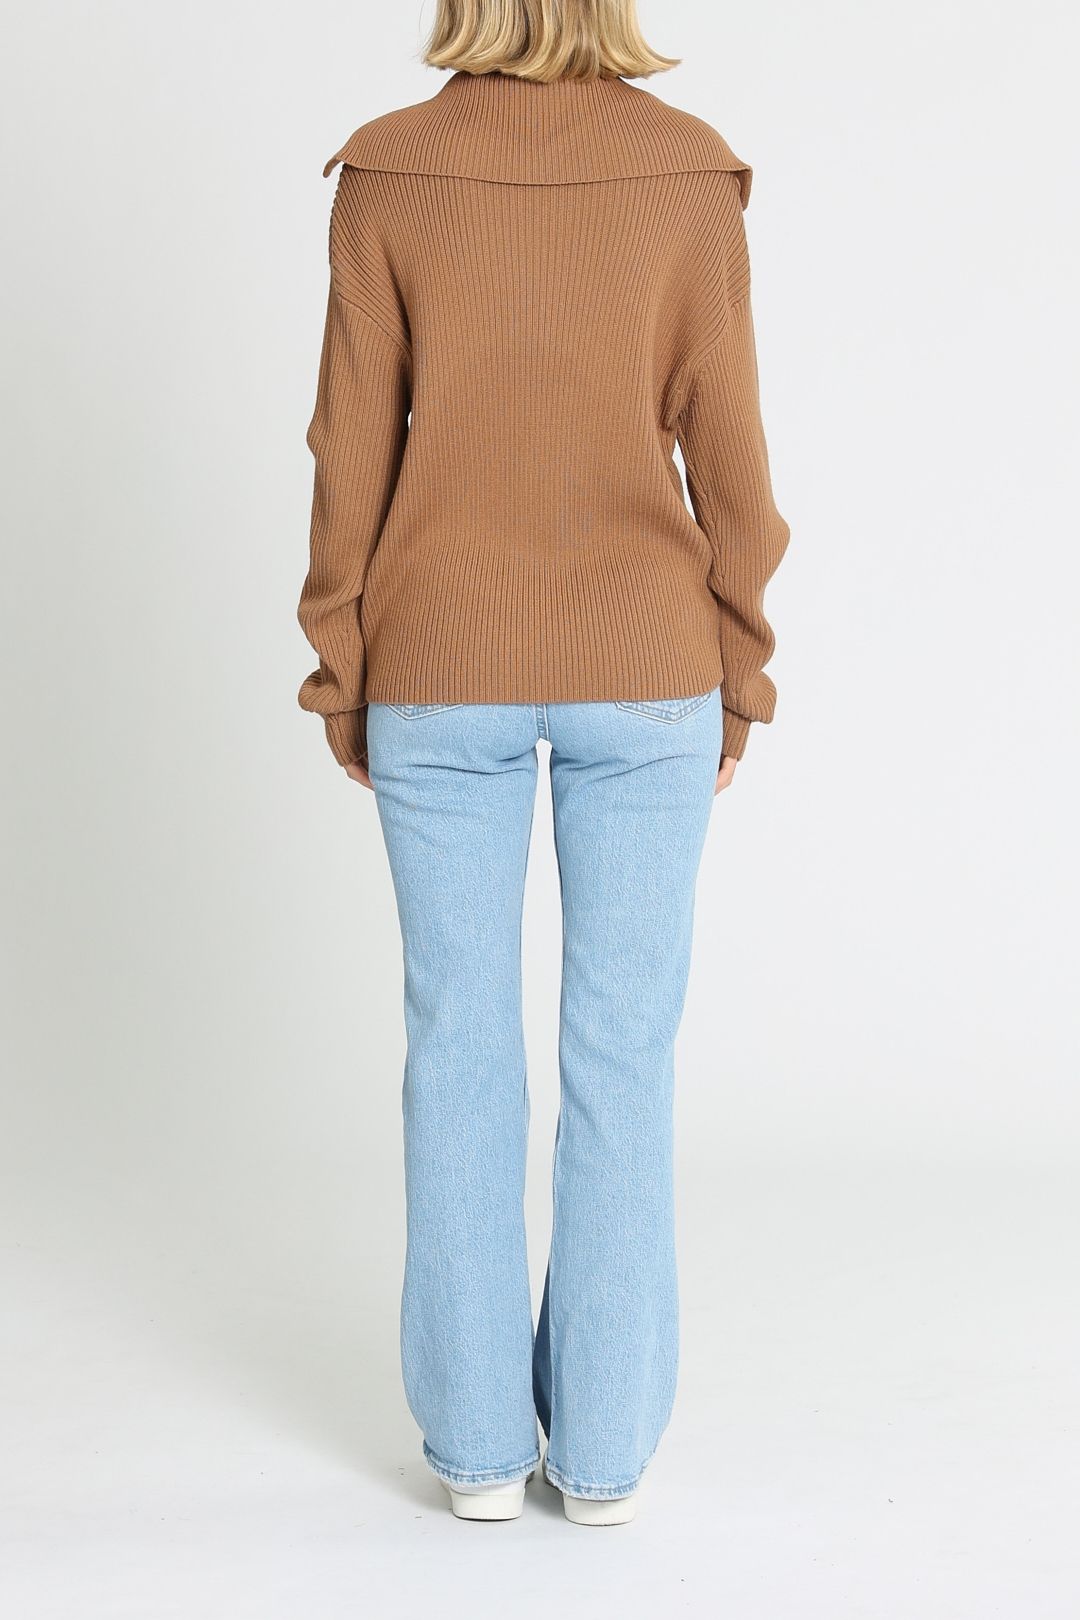 Camilla and Marc Dena Collared Knit Tan Relaxed